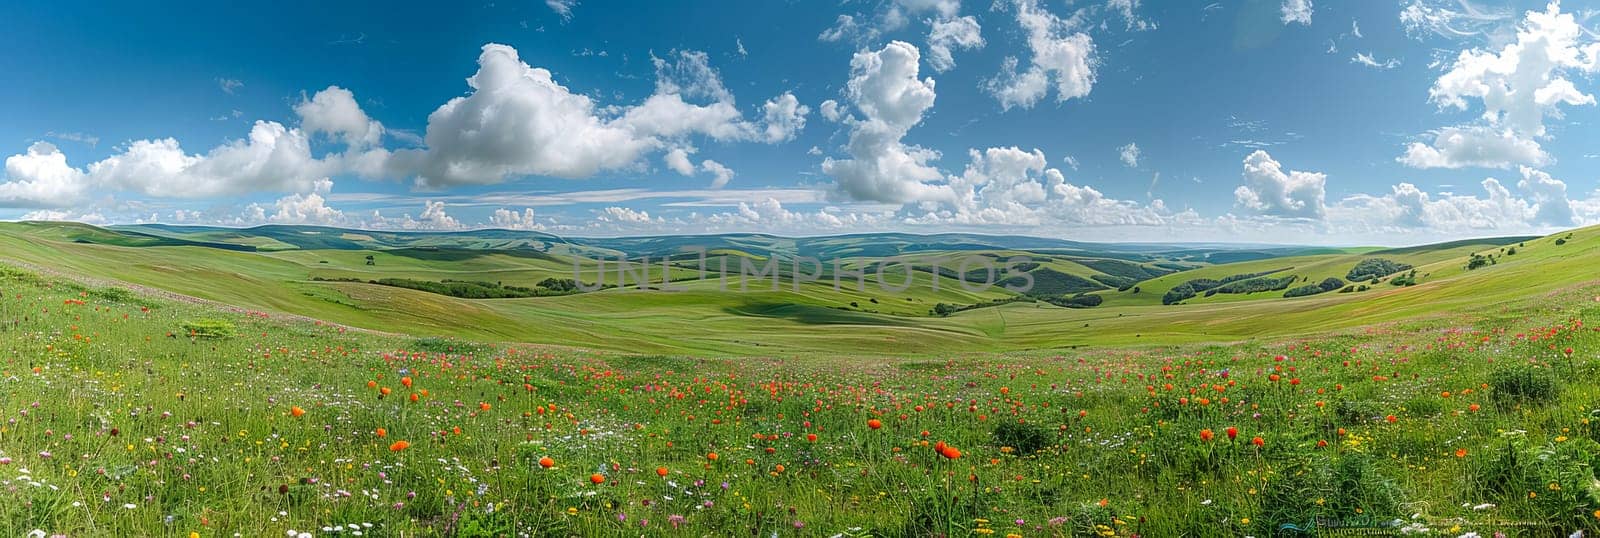 Landscape with field and a blue sky on a summer sunny day. by OlgaGubskaya